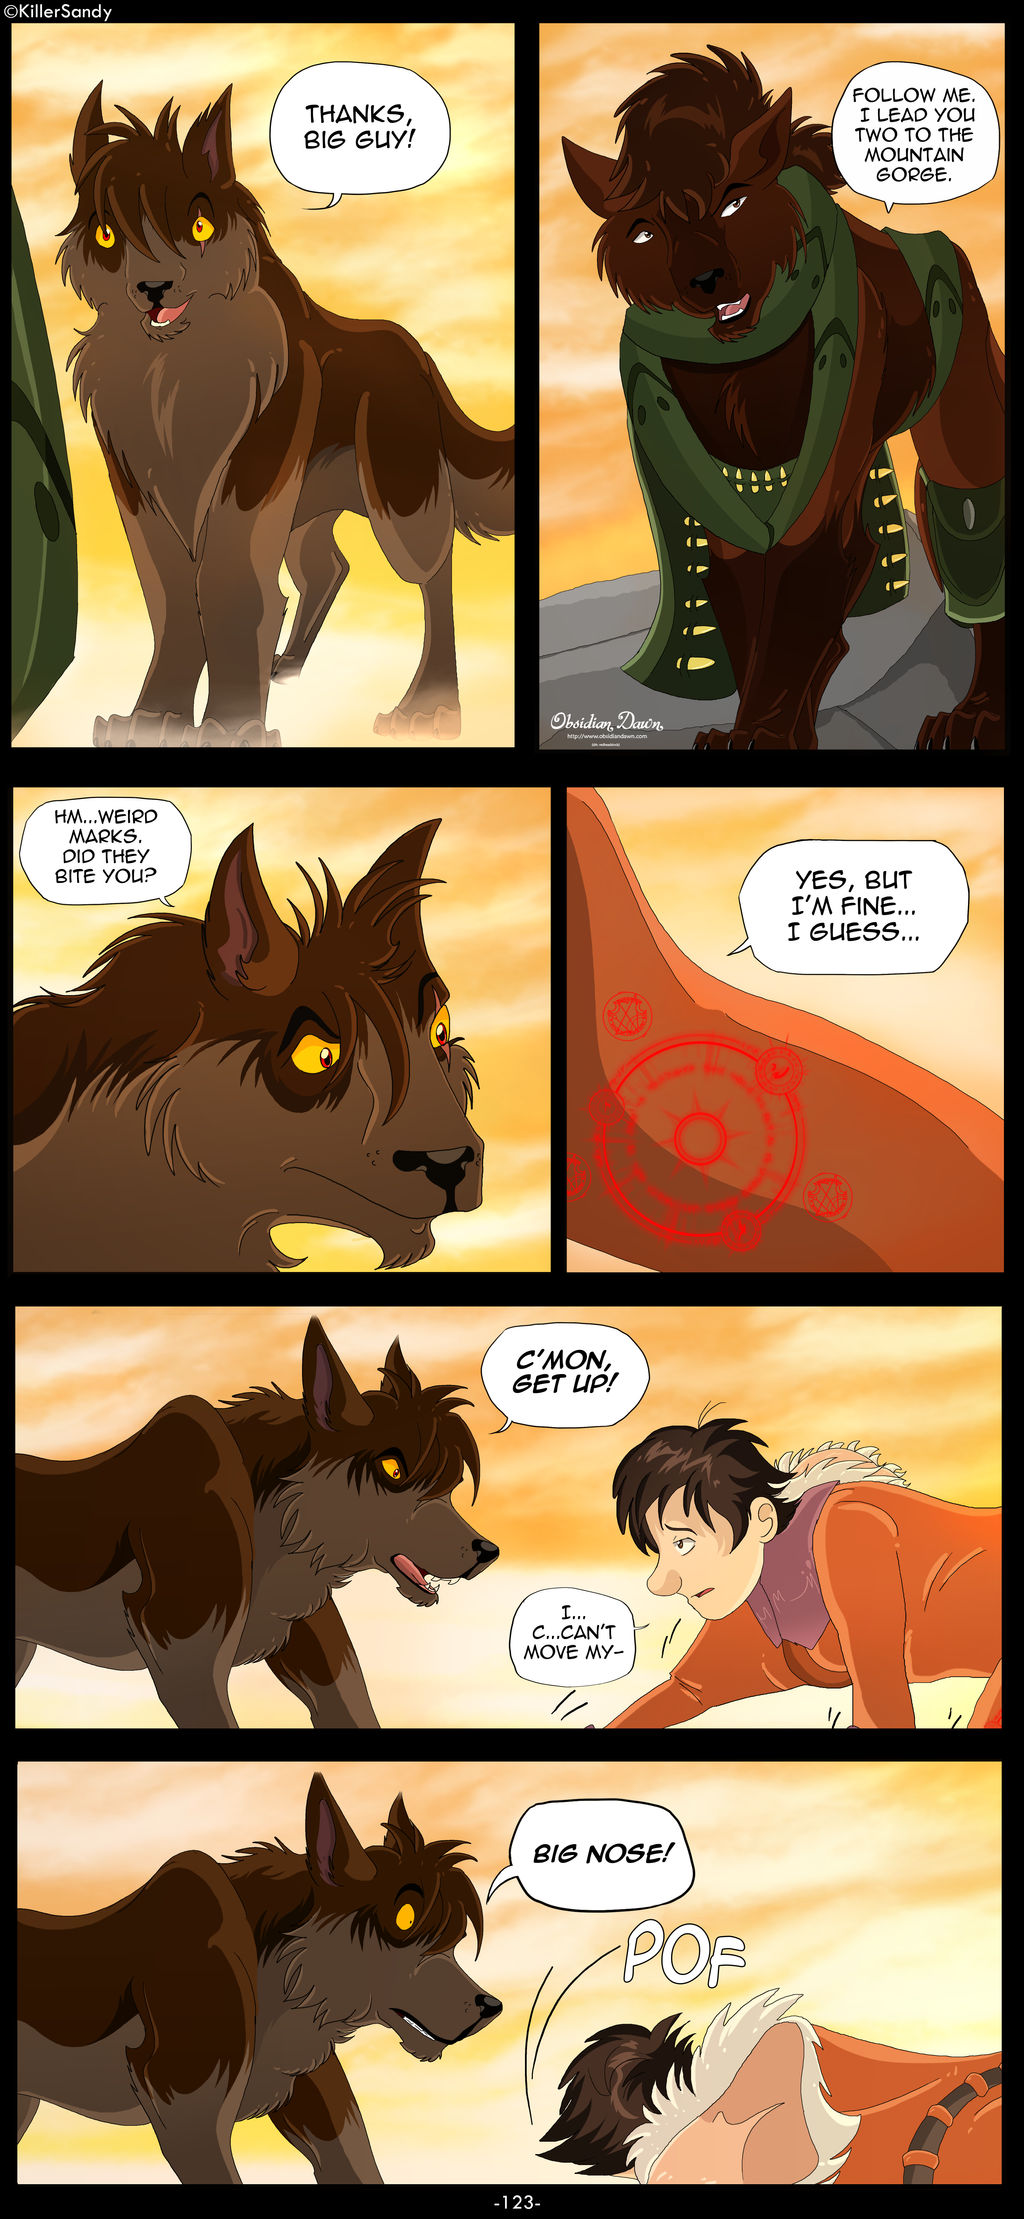 The Prince of the Moonlight Stone page 123